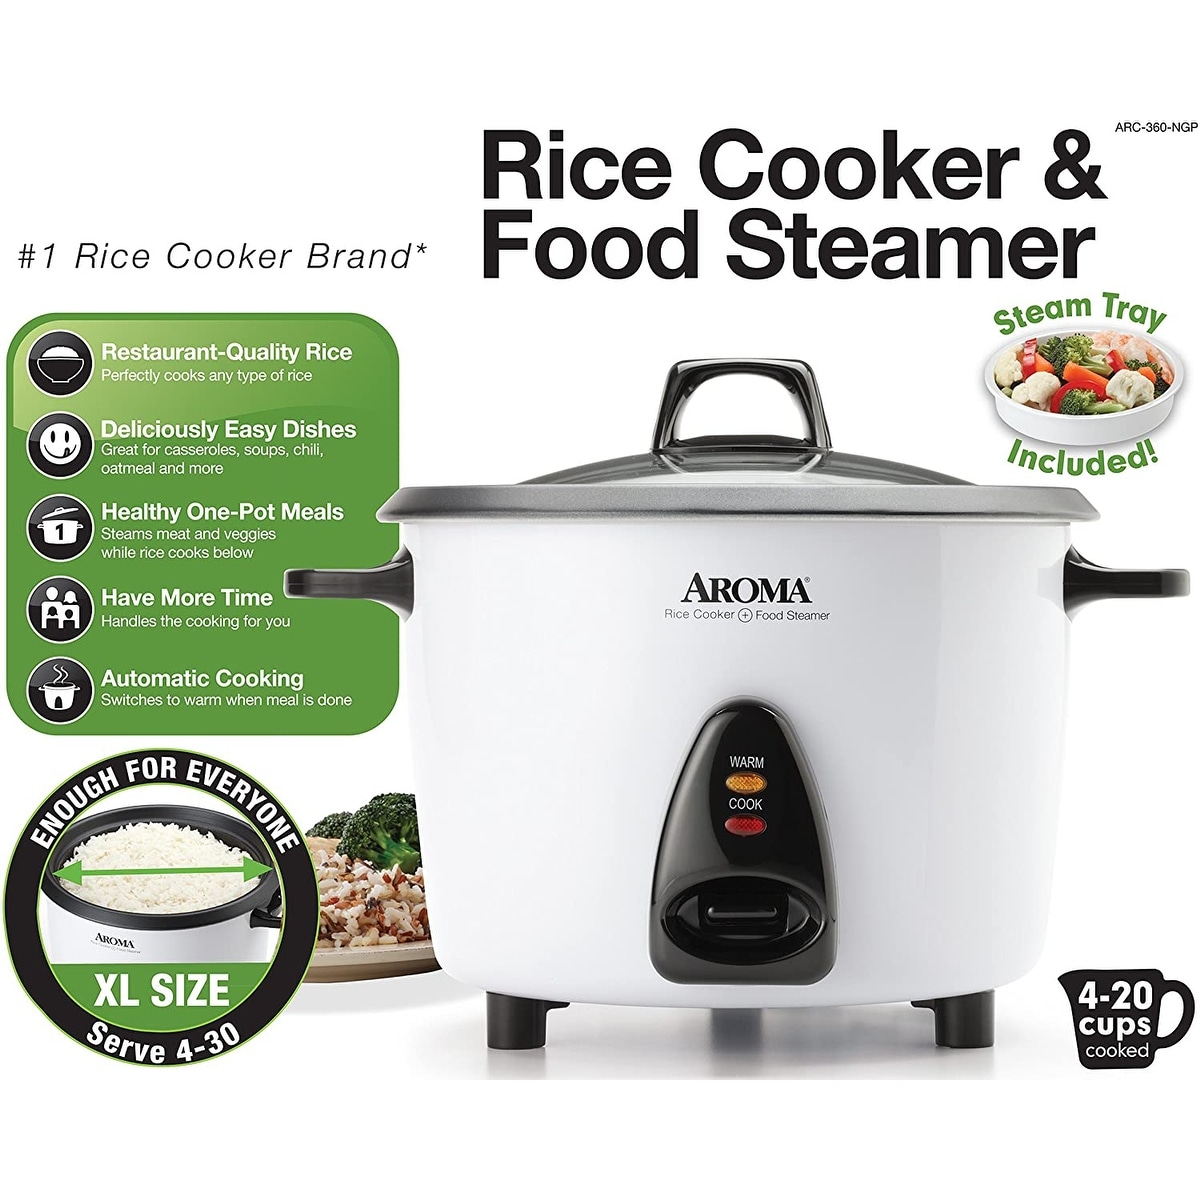 https://ak1.ostkcdn.com/images/products/is/images/direct/92c6825db2046894535b6116d44bcf970890e00a/Aroma-Housewares-20-Cup-Rice-Cooker-%26-Food-Steamer-ARC-360-NGP.jpg